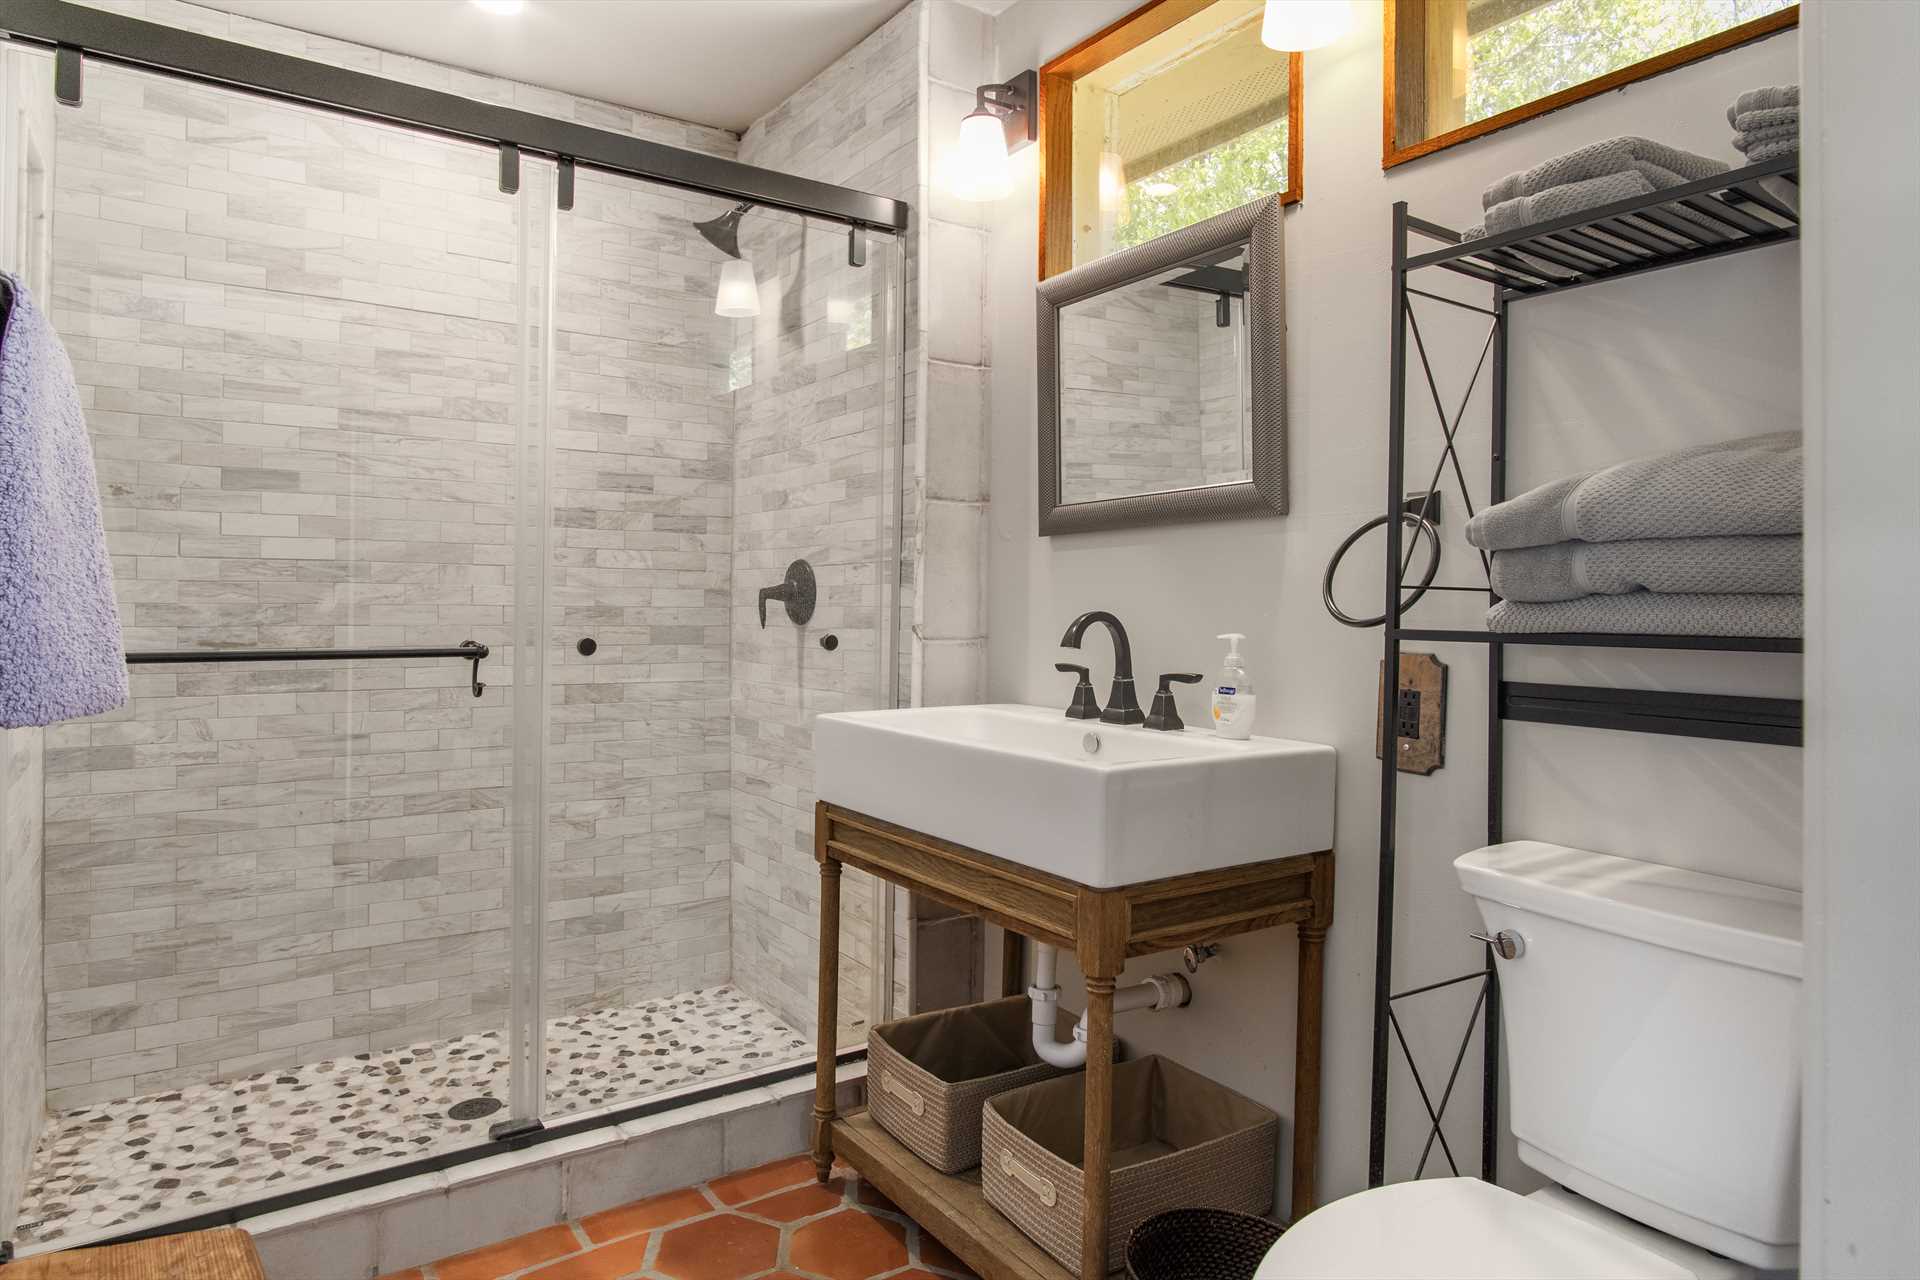                                                 Here's the third full bath at Casa del Rio, this one with a sharp and modern walk-in shower.